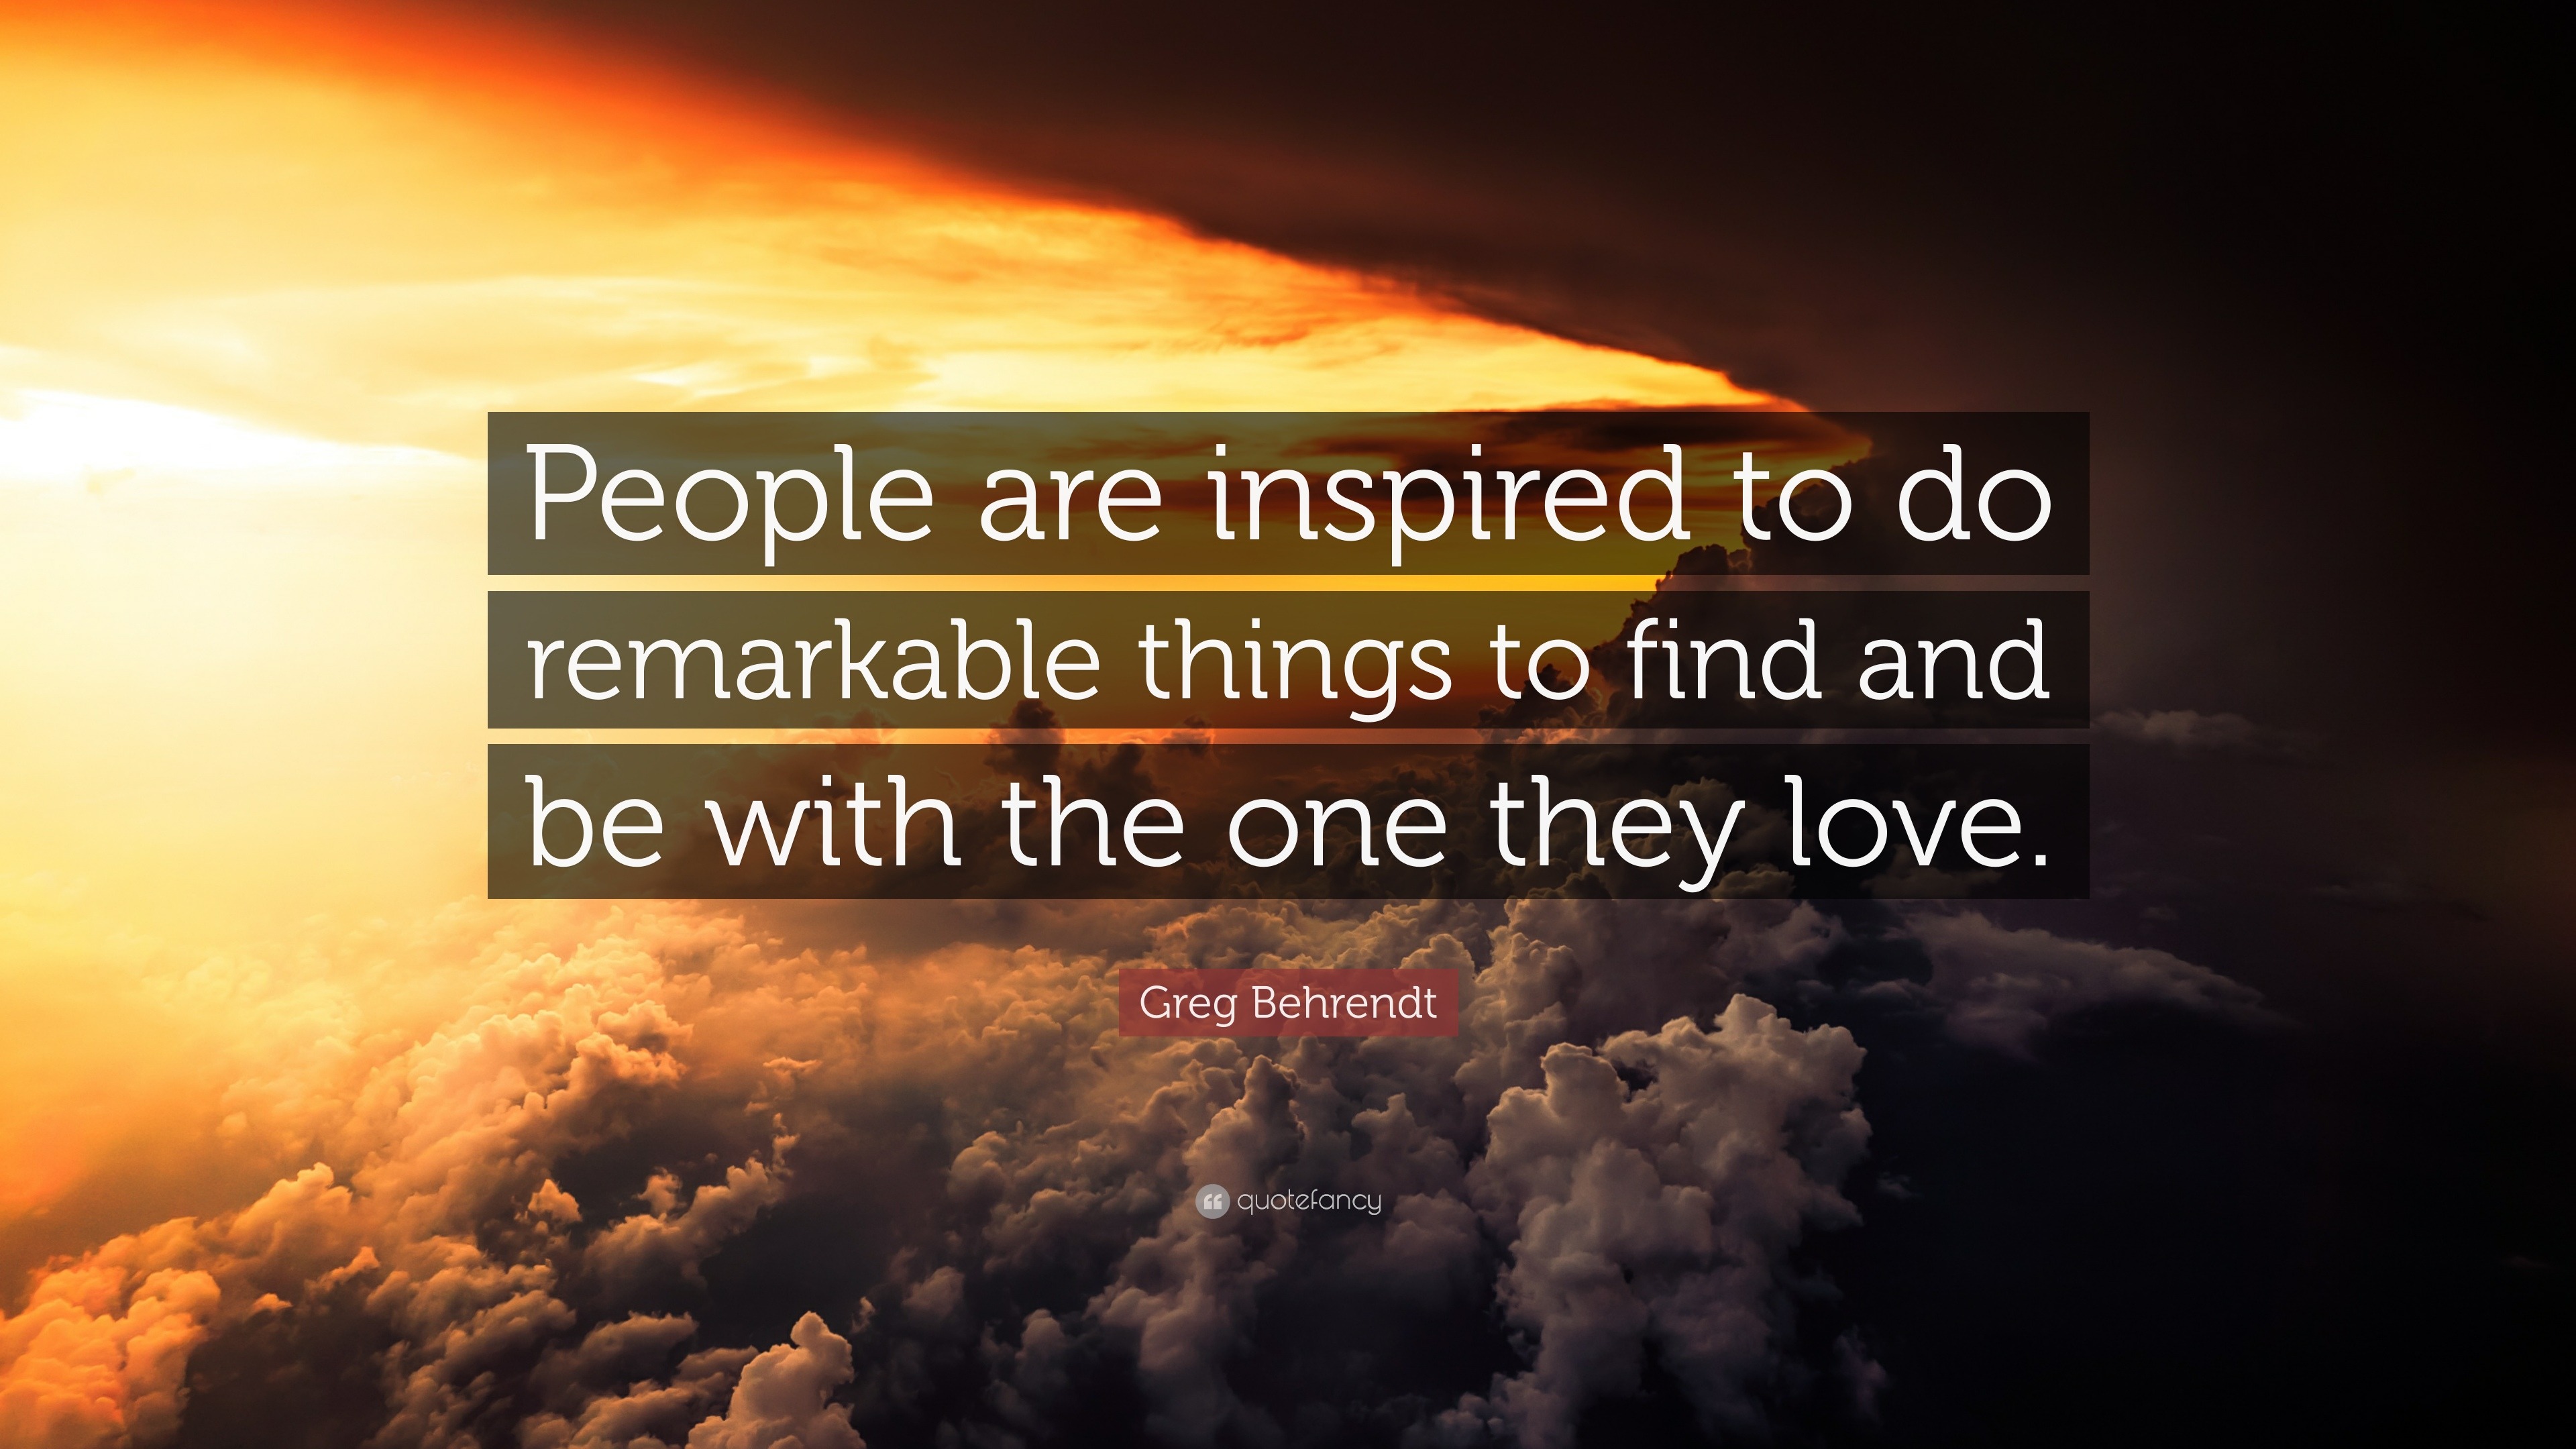 Greg Behrendt Quote: “People are inspired to do remarkable things to ...